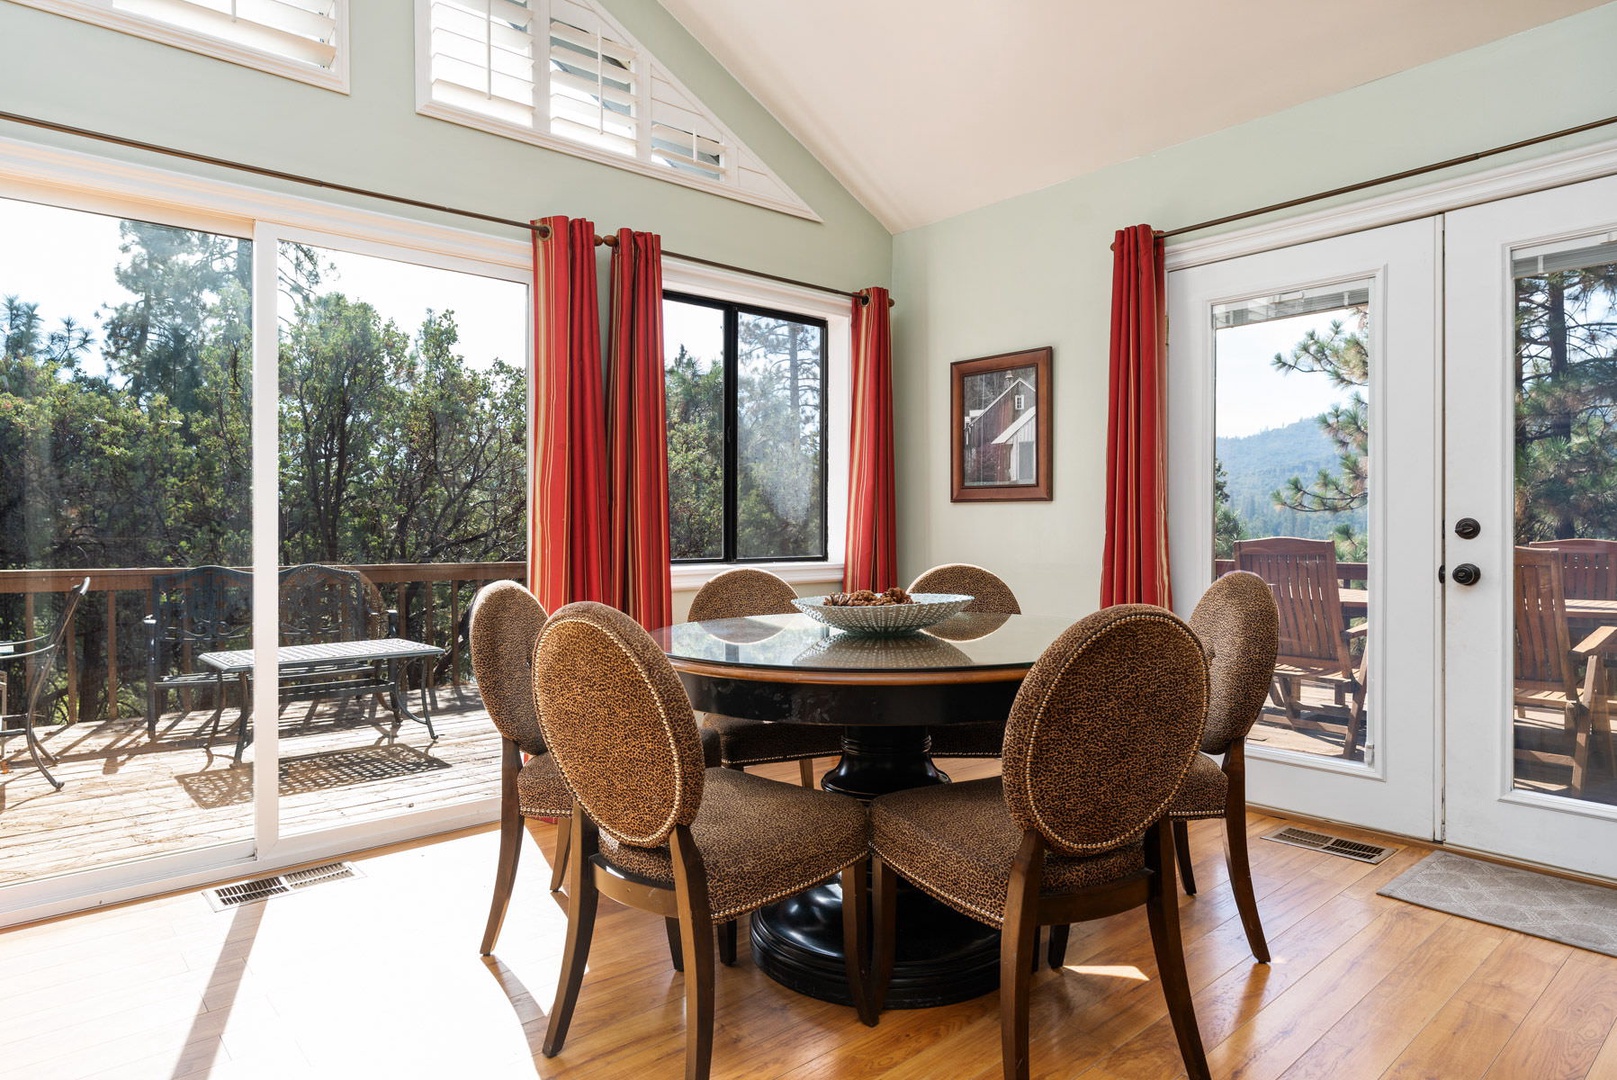 Enjoy the forest views around dining table with seating 6